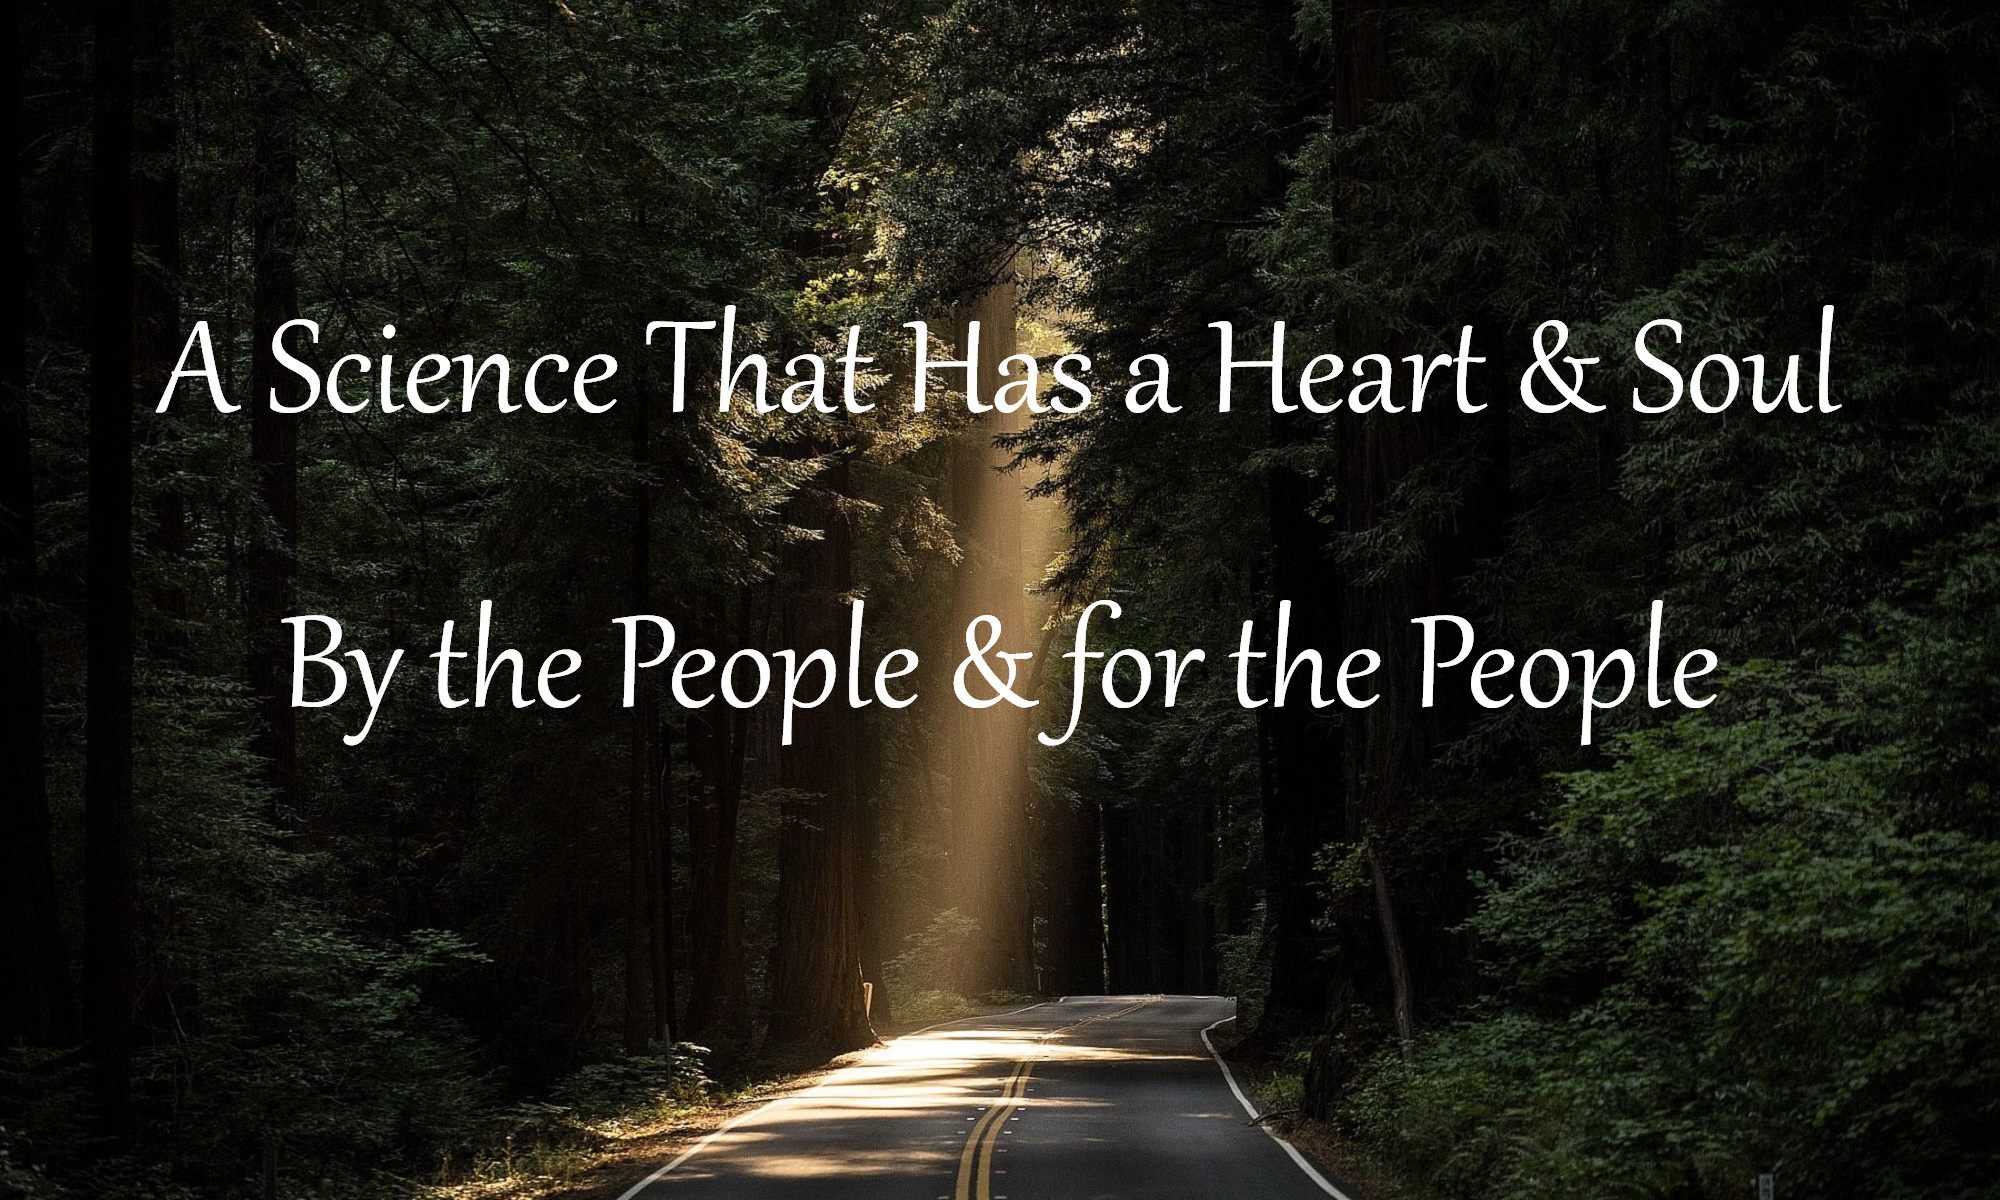 A Science That Has a Heart & Soul: By the People & for the People